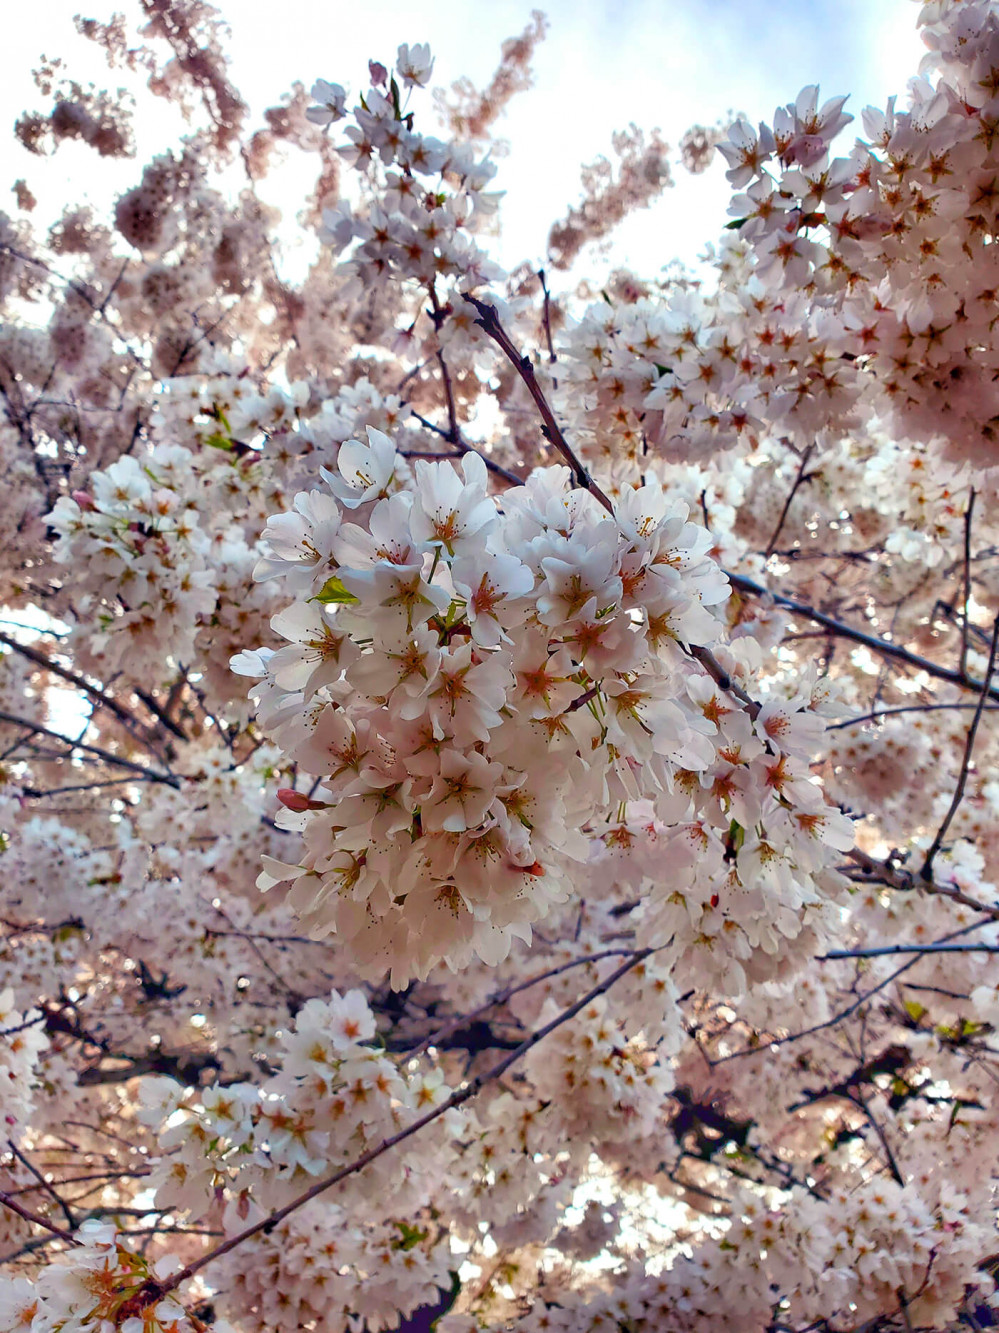 A closeup shot of cherry blossoms in full bloom